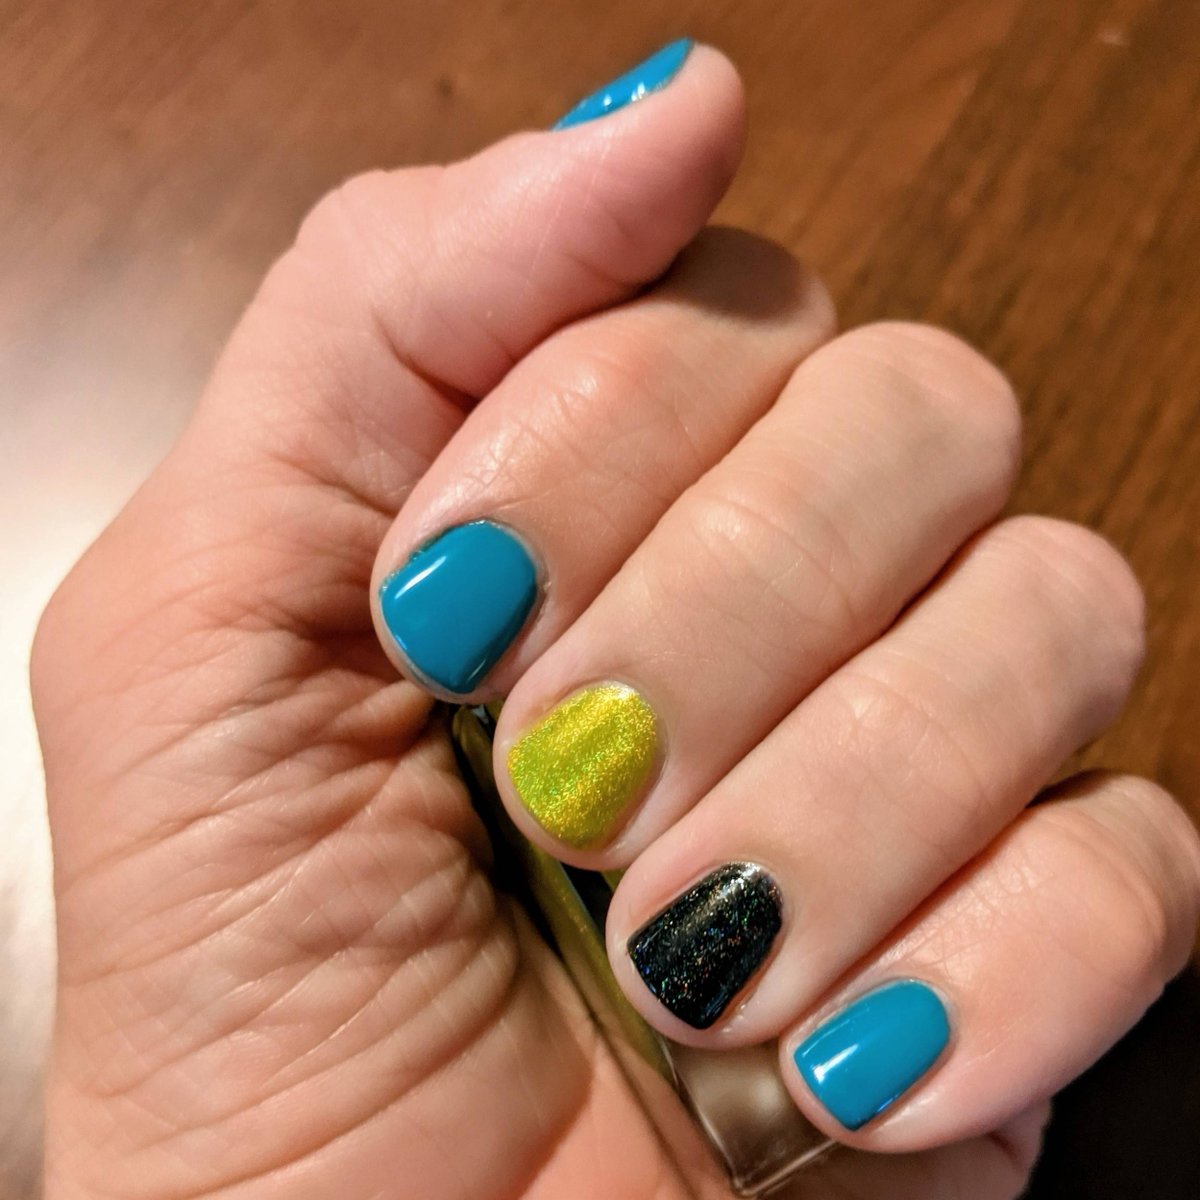 #AEWDynamite is tonight, which means TOMORROW IS THE #NFLDRAFT BAY BEEEEEE! @Jaguars HAVE THE NUMBER 1 PICK! LETS GO! #DUUUVAL!! #ShowDayNails